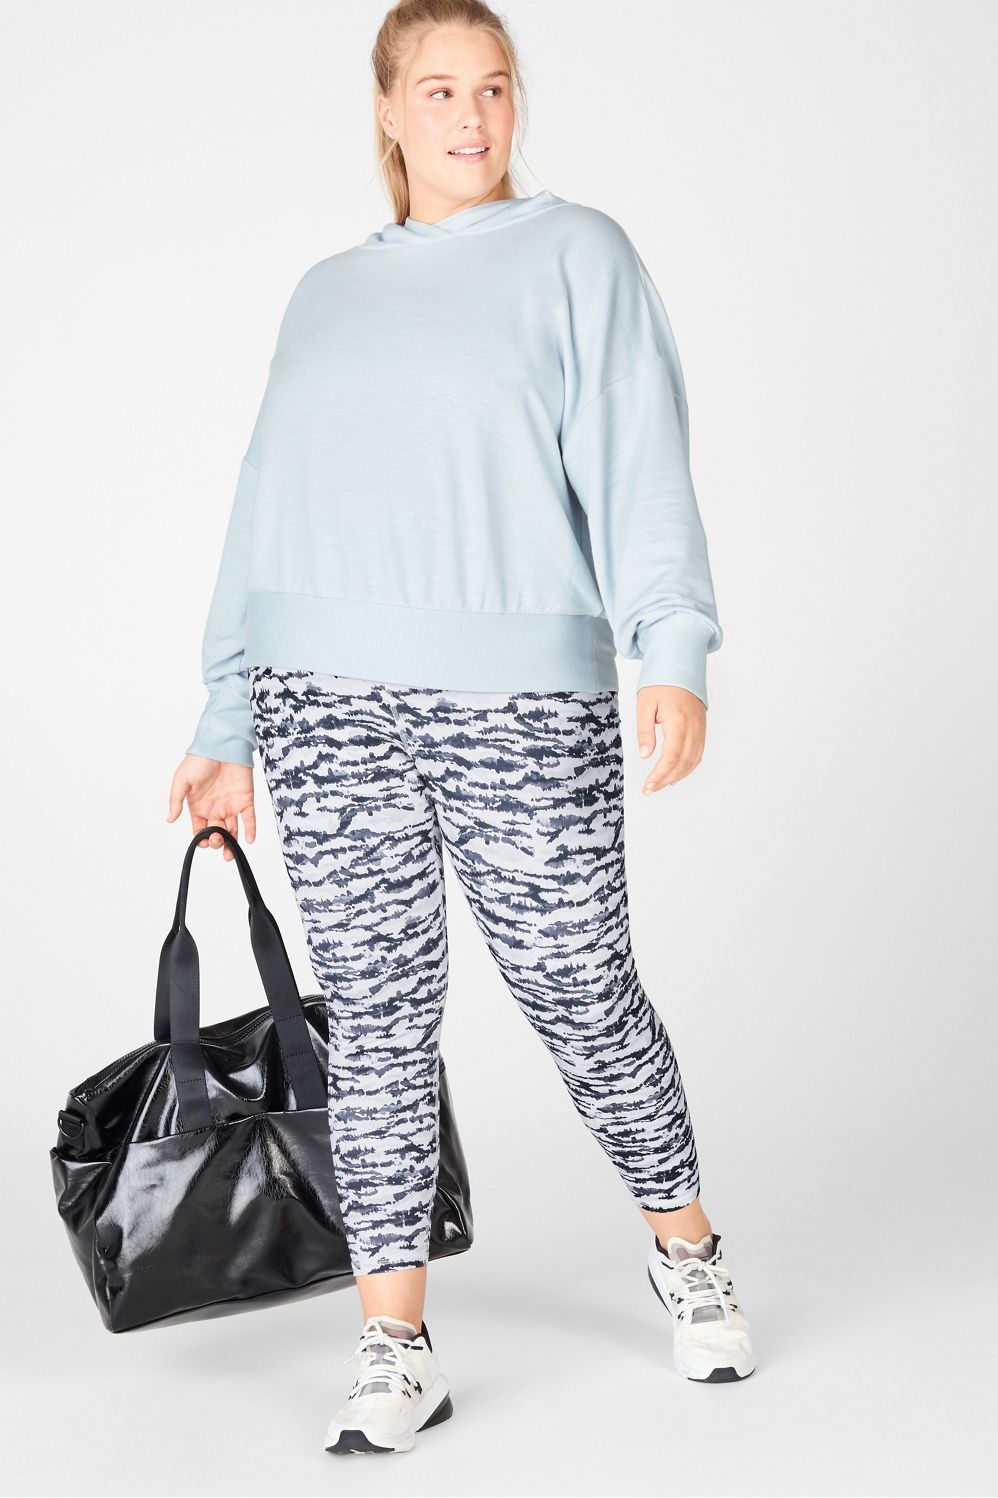 Outfits
					
				
					
										
				
	
				/
			
		
	
 
				
					Level 2-Piece Outfit
				
	... | Fabletics